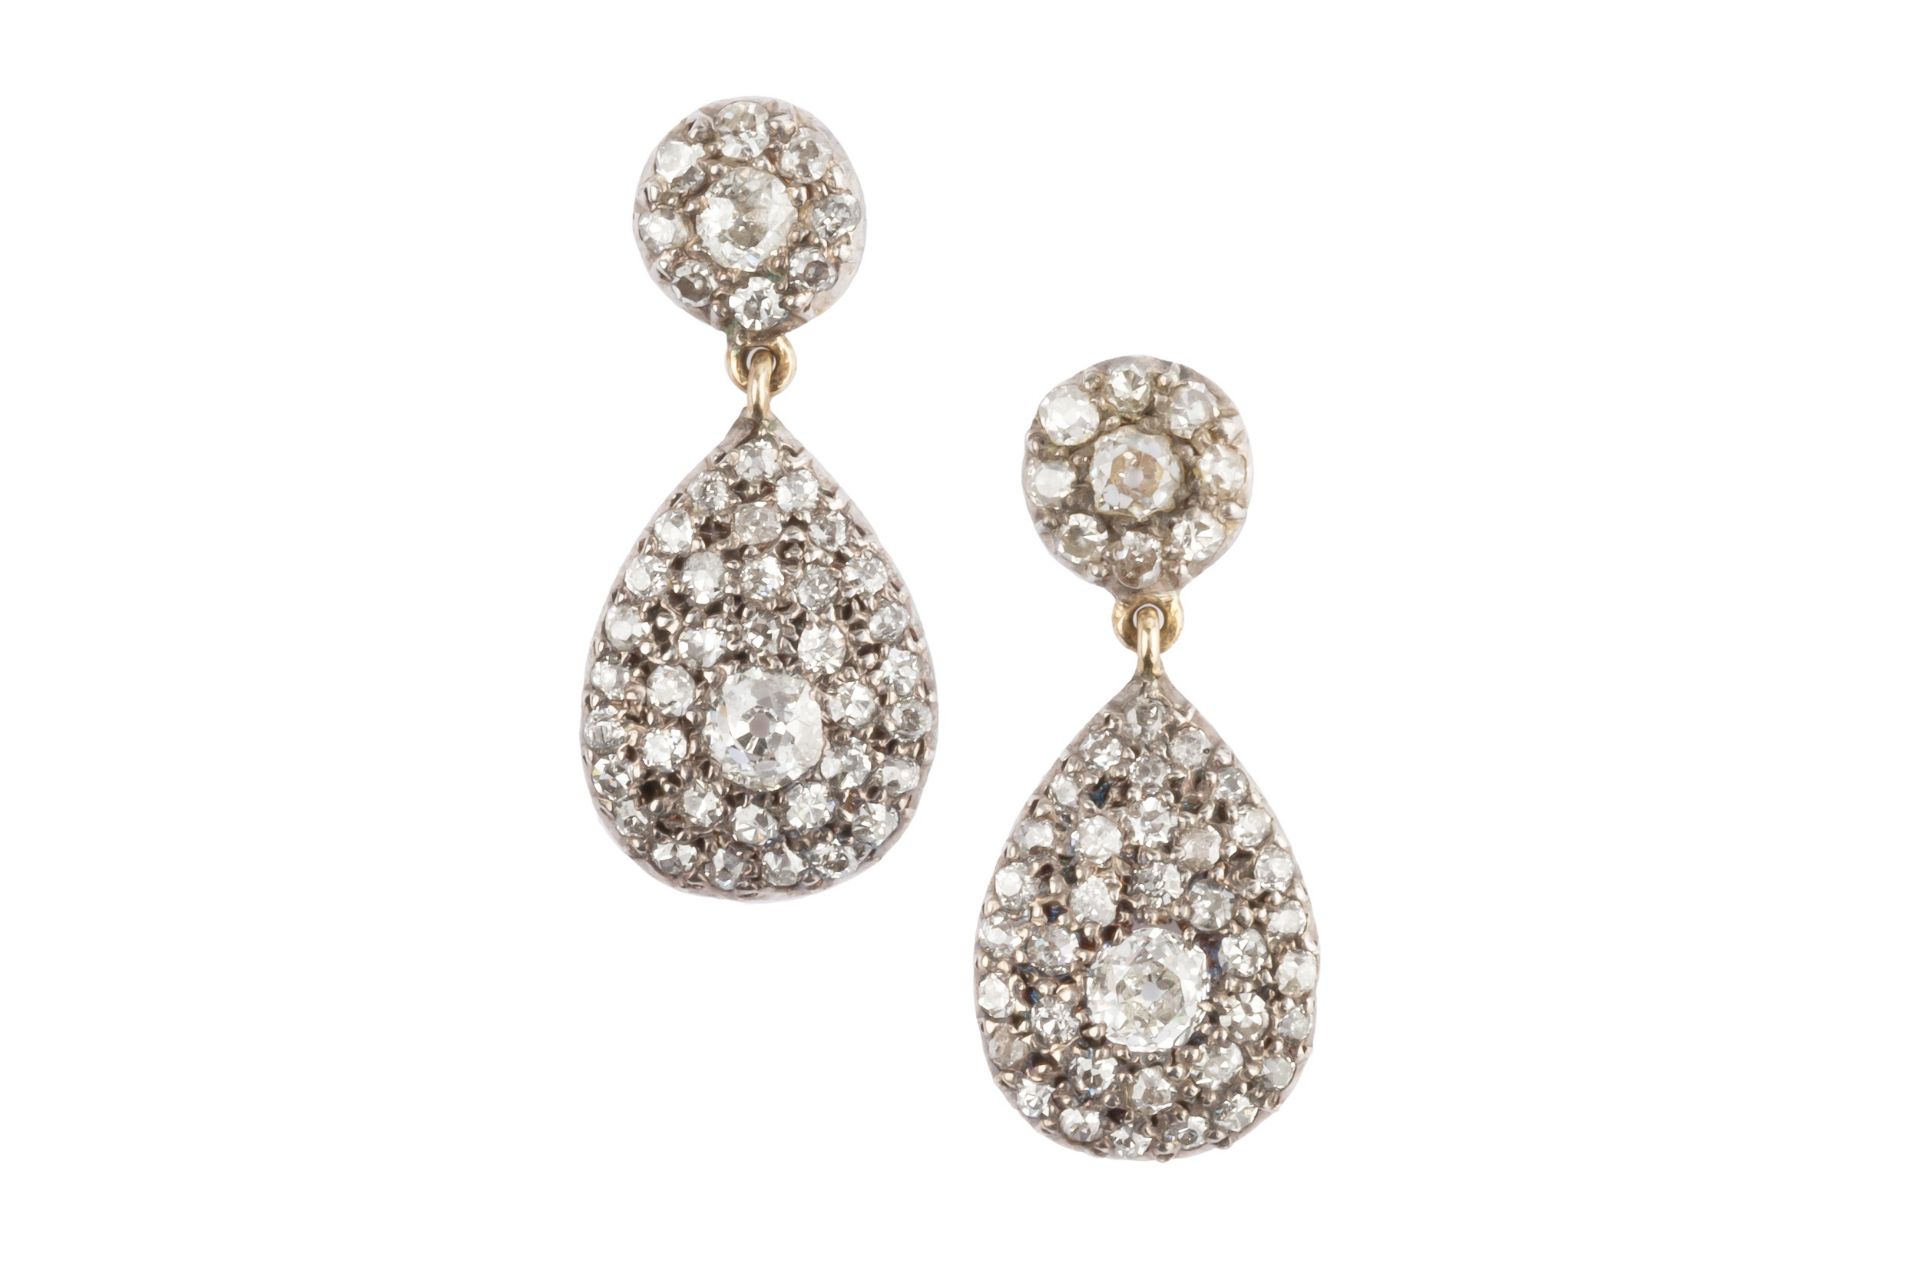 A pair of diamond ear pendants, each designed as a circular cluster of old and single-cut